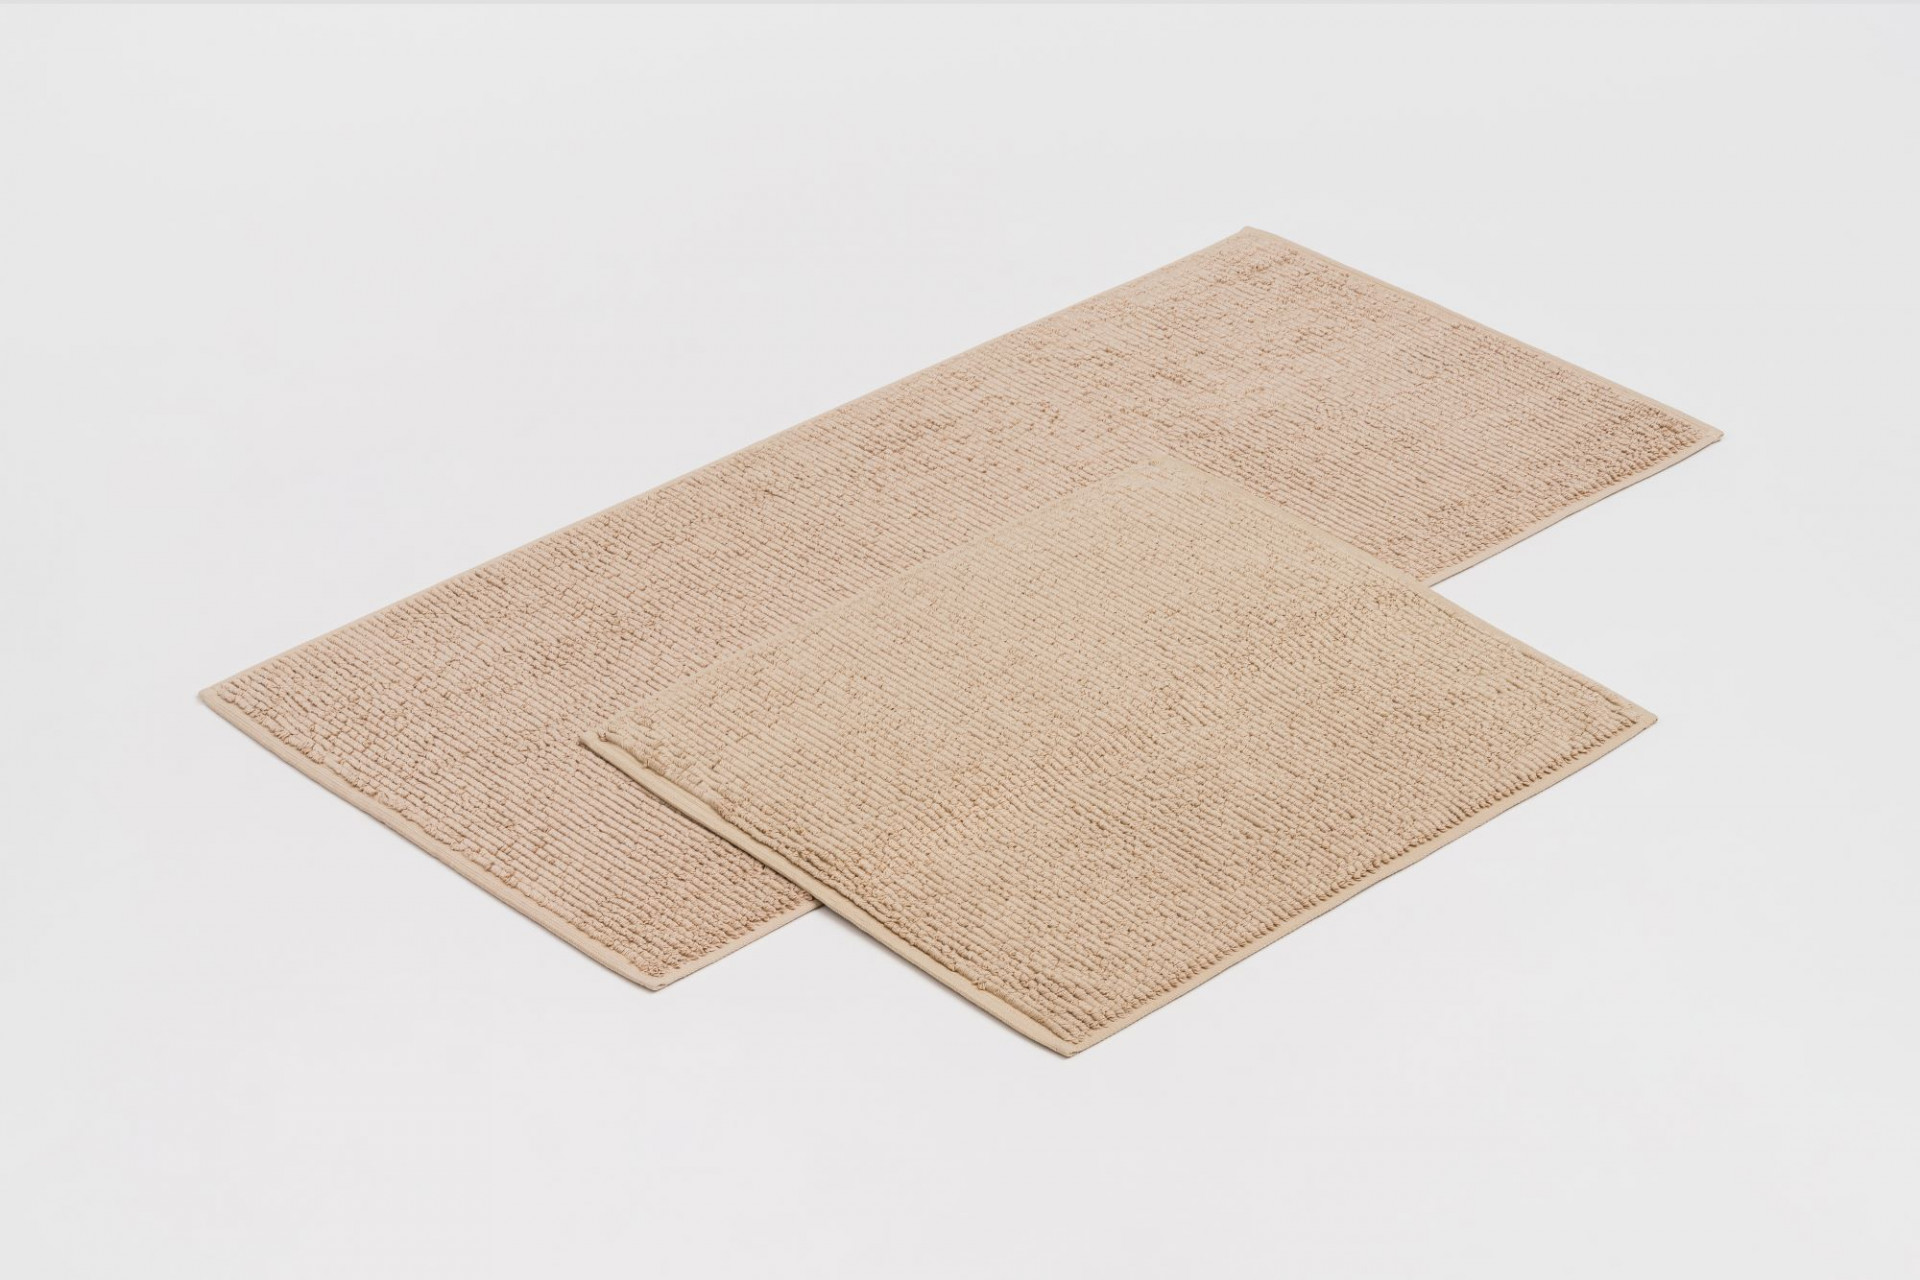 Both our Soft Cotton bath mat sizes are available in four Lejaan signature shades.